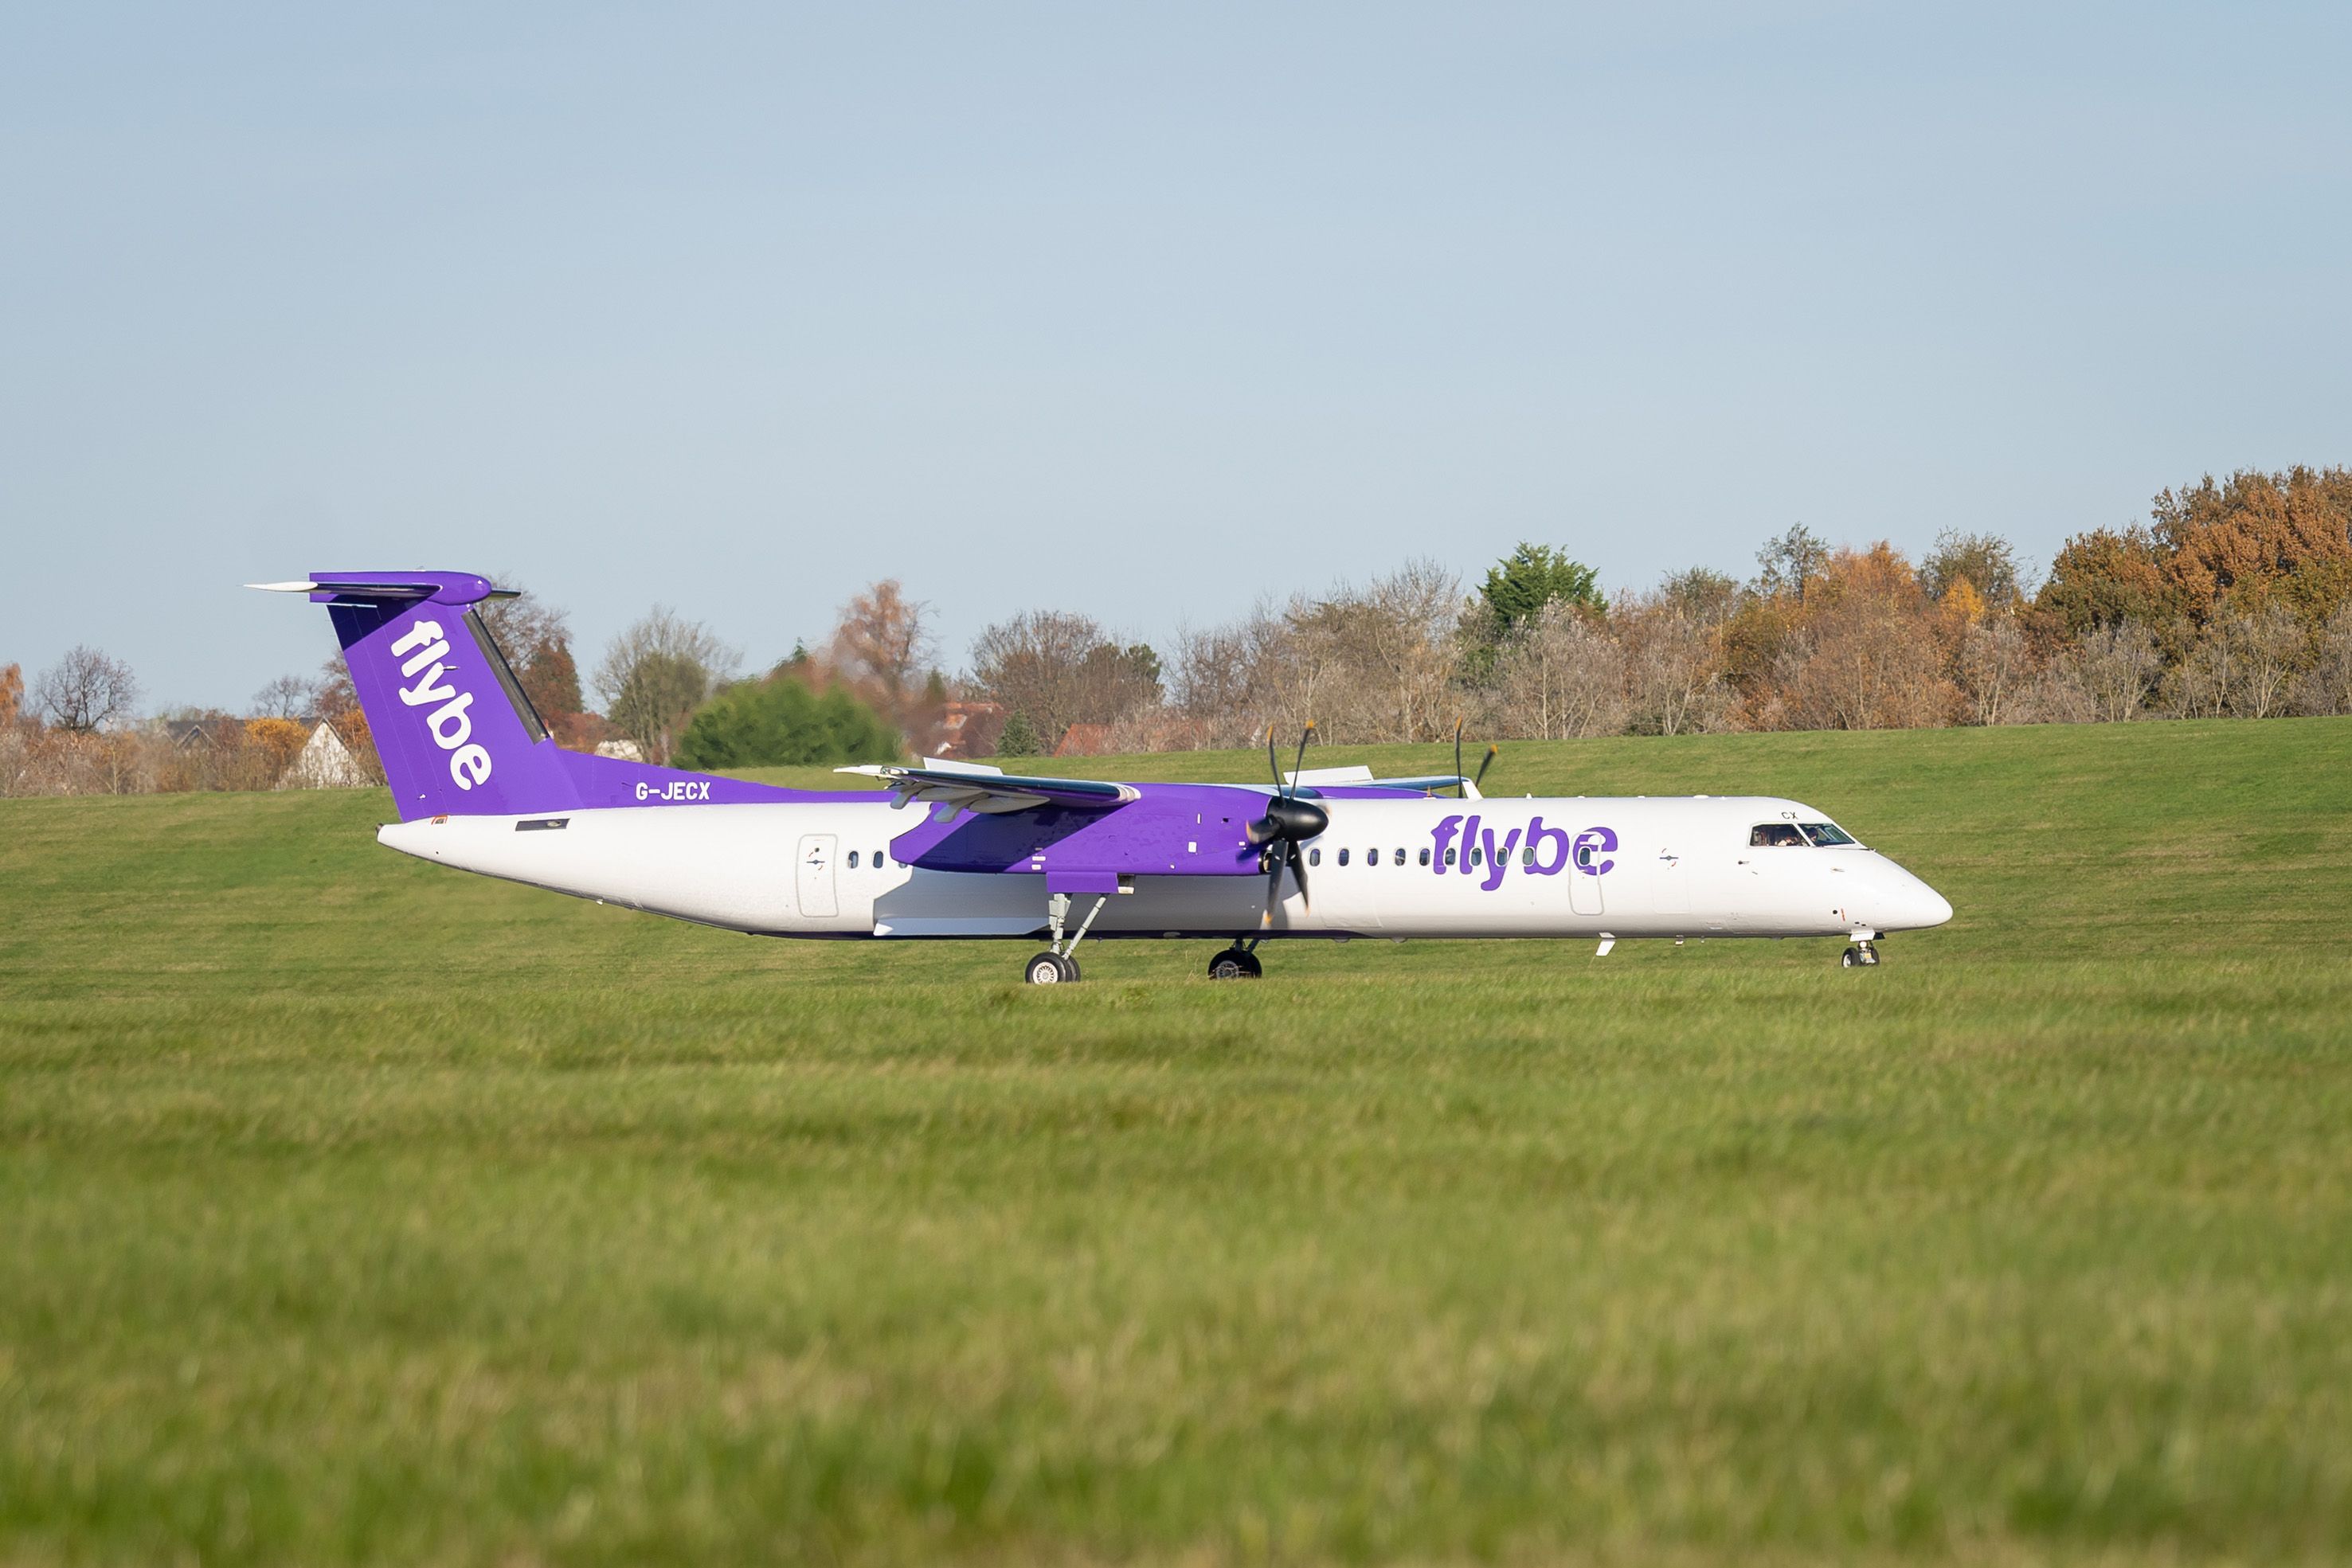 Flybe turboprop aircraft